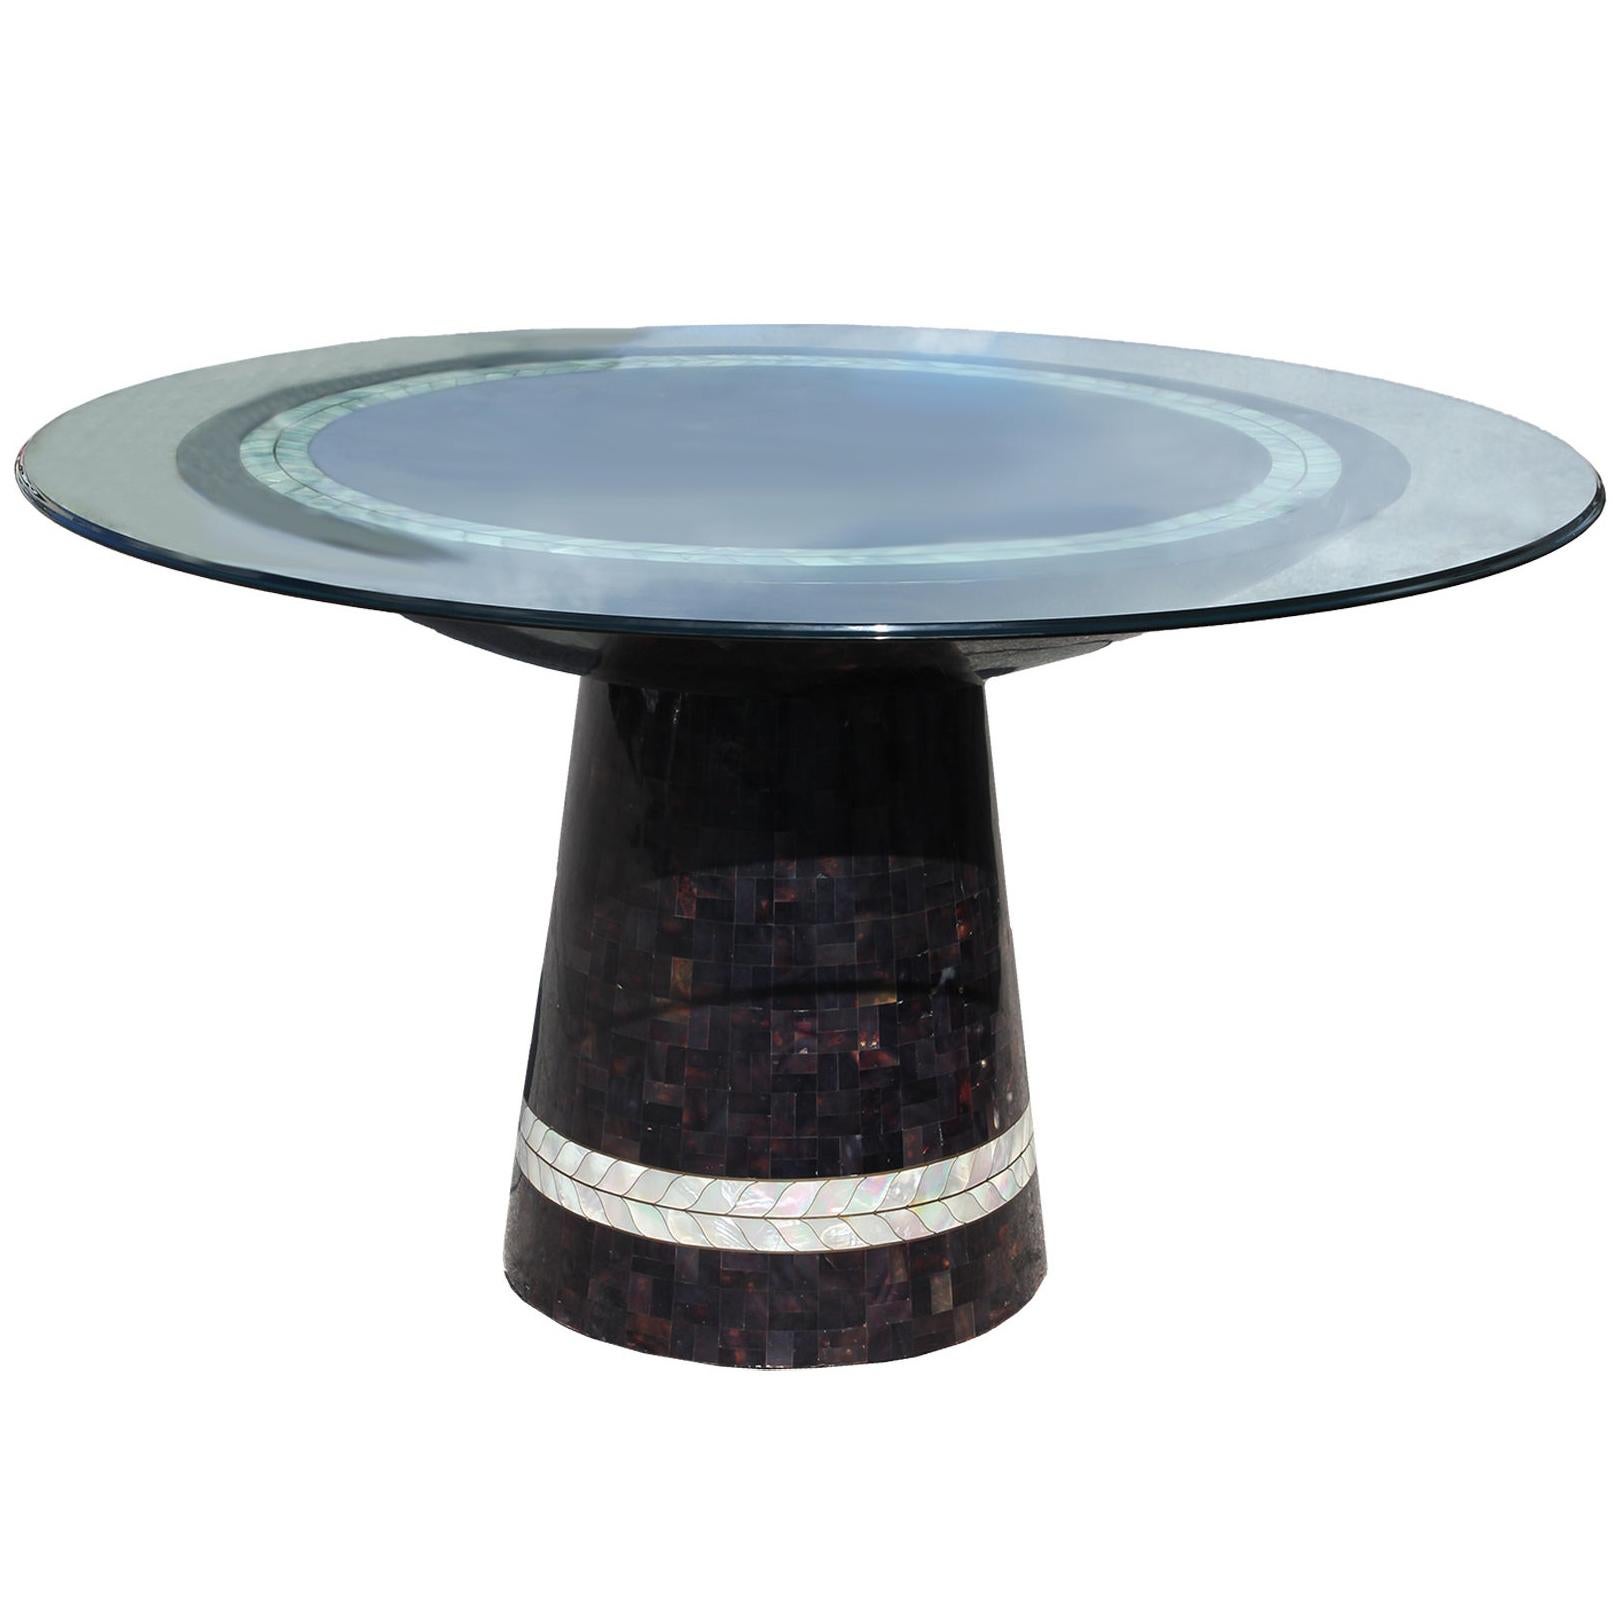 Incredible Tessellated Stone / Pearl Round Pedestal Dining Table